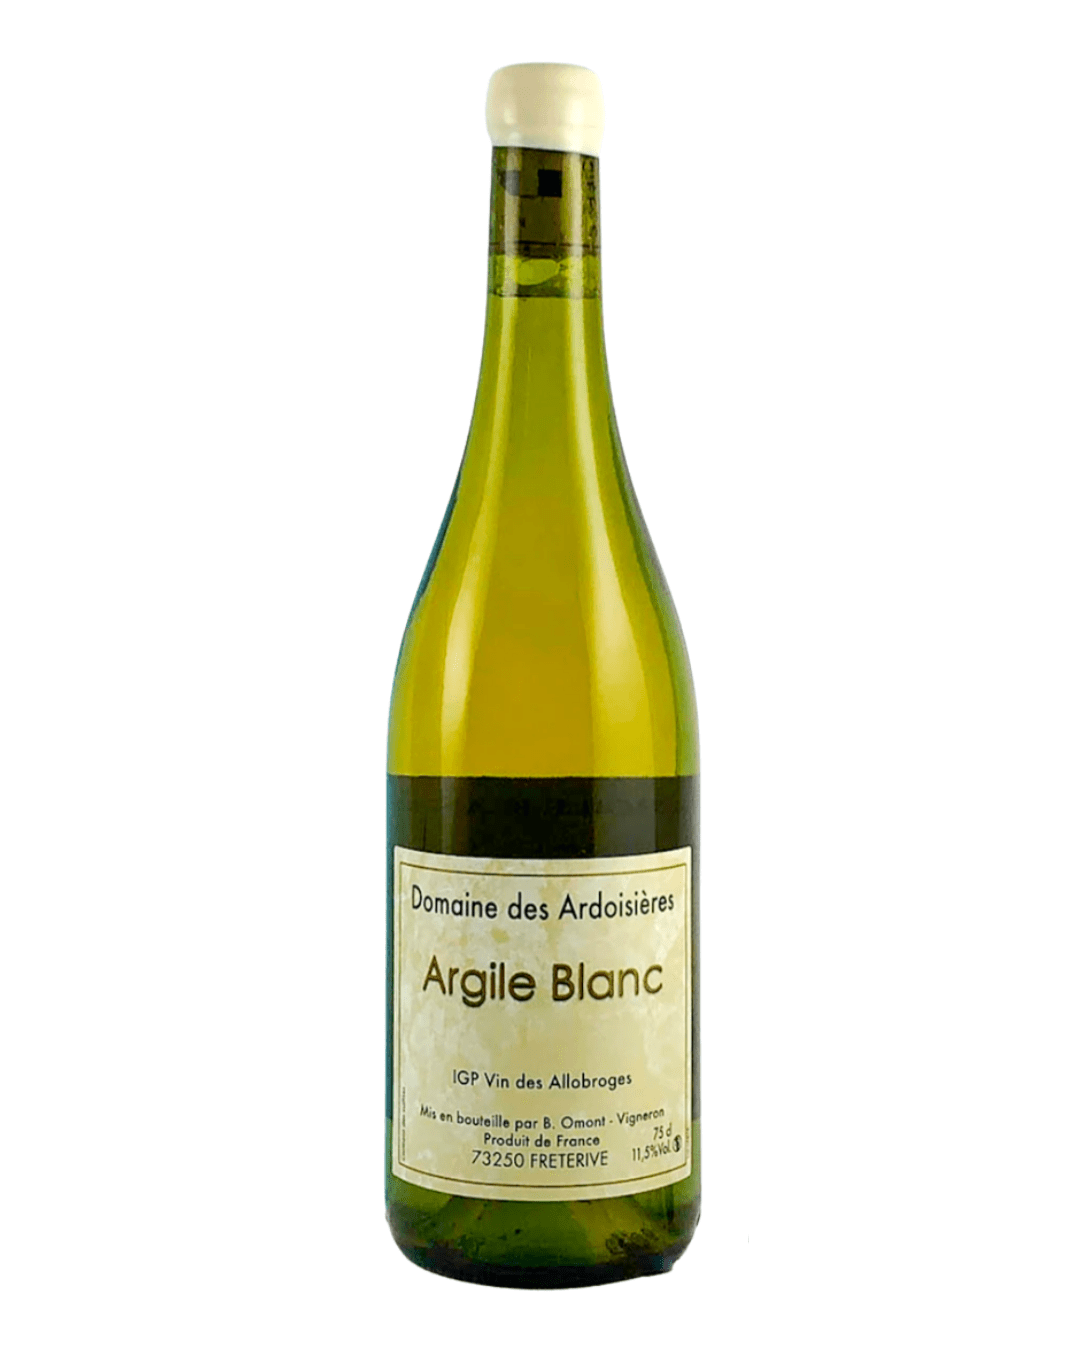 Shop Domaine des Ardoiseres Domaine des Ardoiseres Argile Blanc IGP Vins des Allobroges 2019 online at PENTICTON artisanal wine store in Hong Kong. Discover other French wines, promotions, workshops and featured offers at pentictonpacific.com 